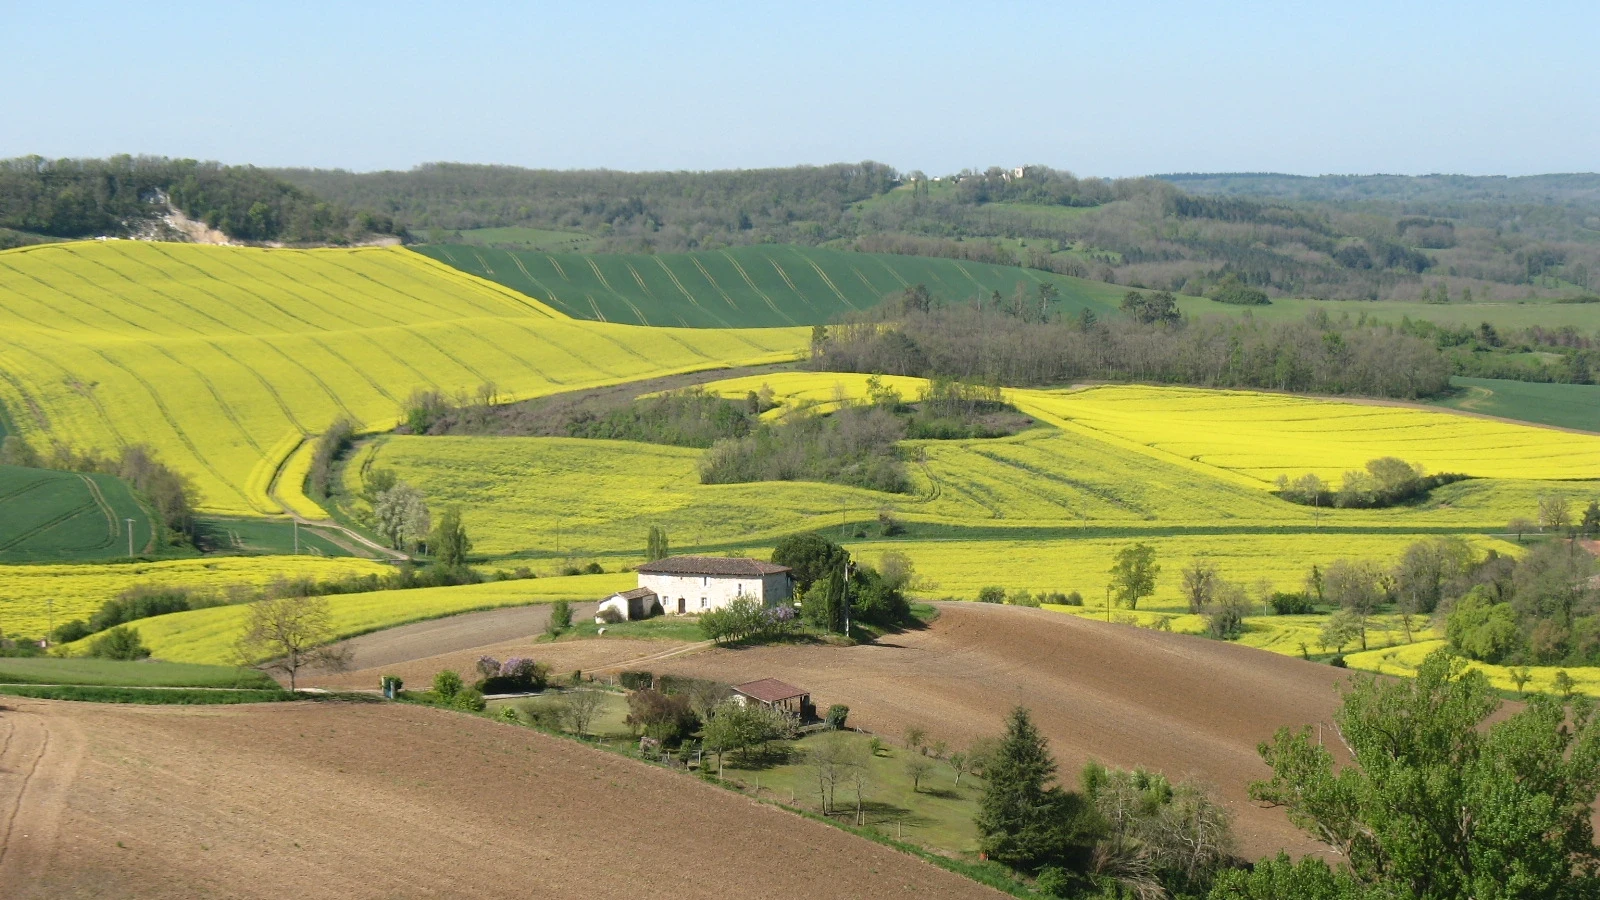 Land monitoring : agricultural area in the South West of France